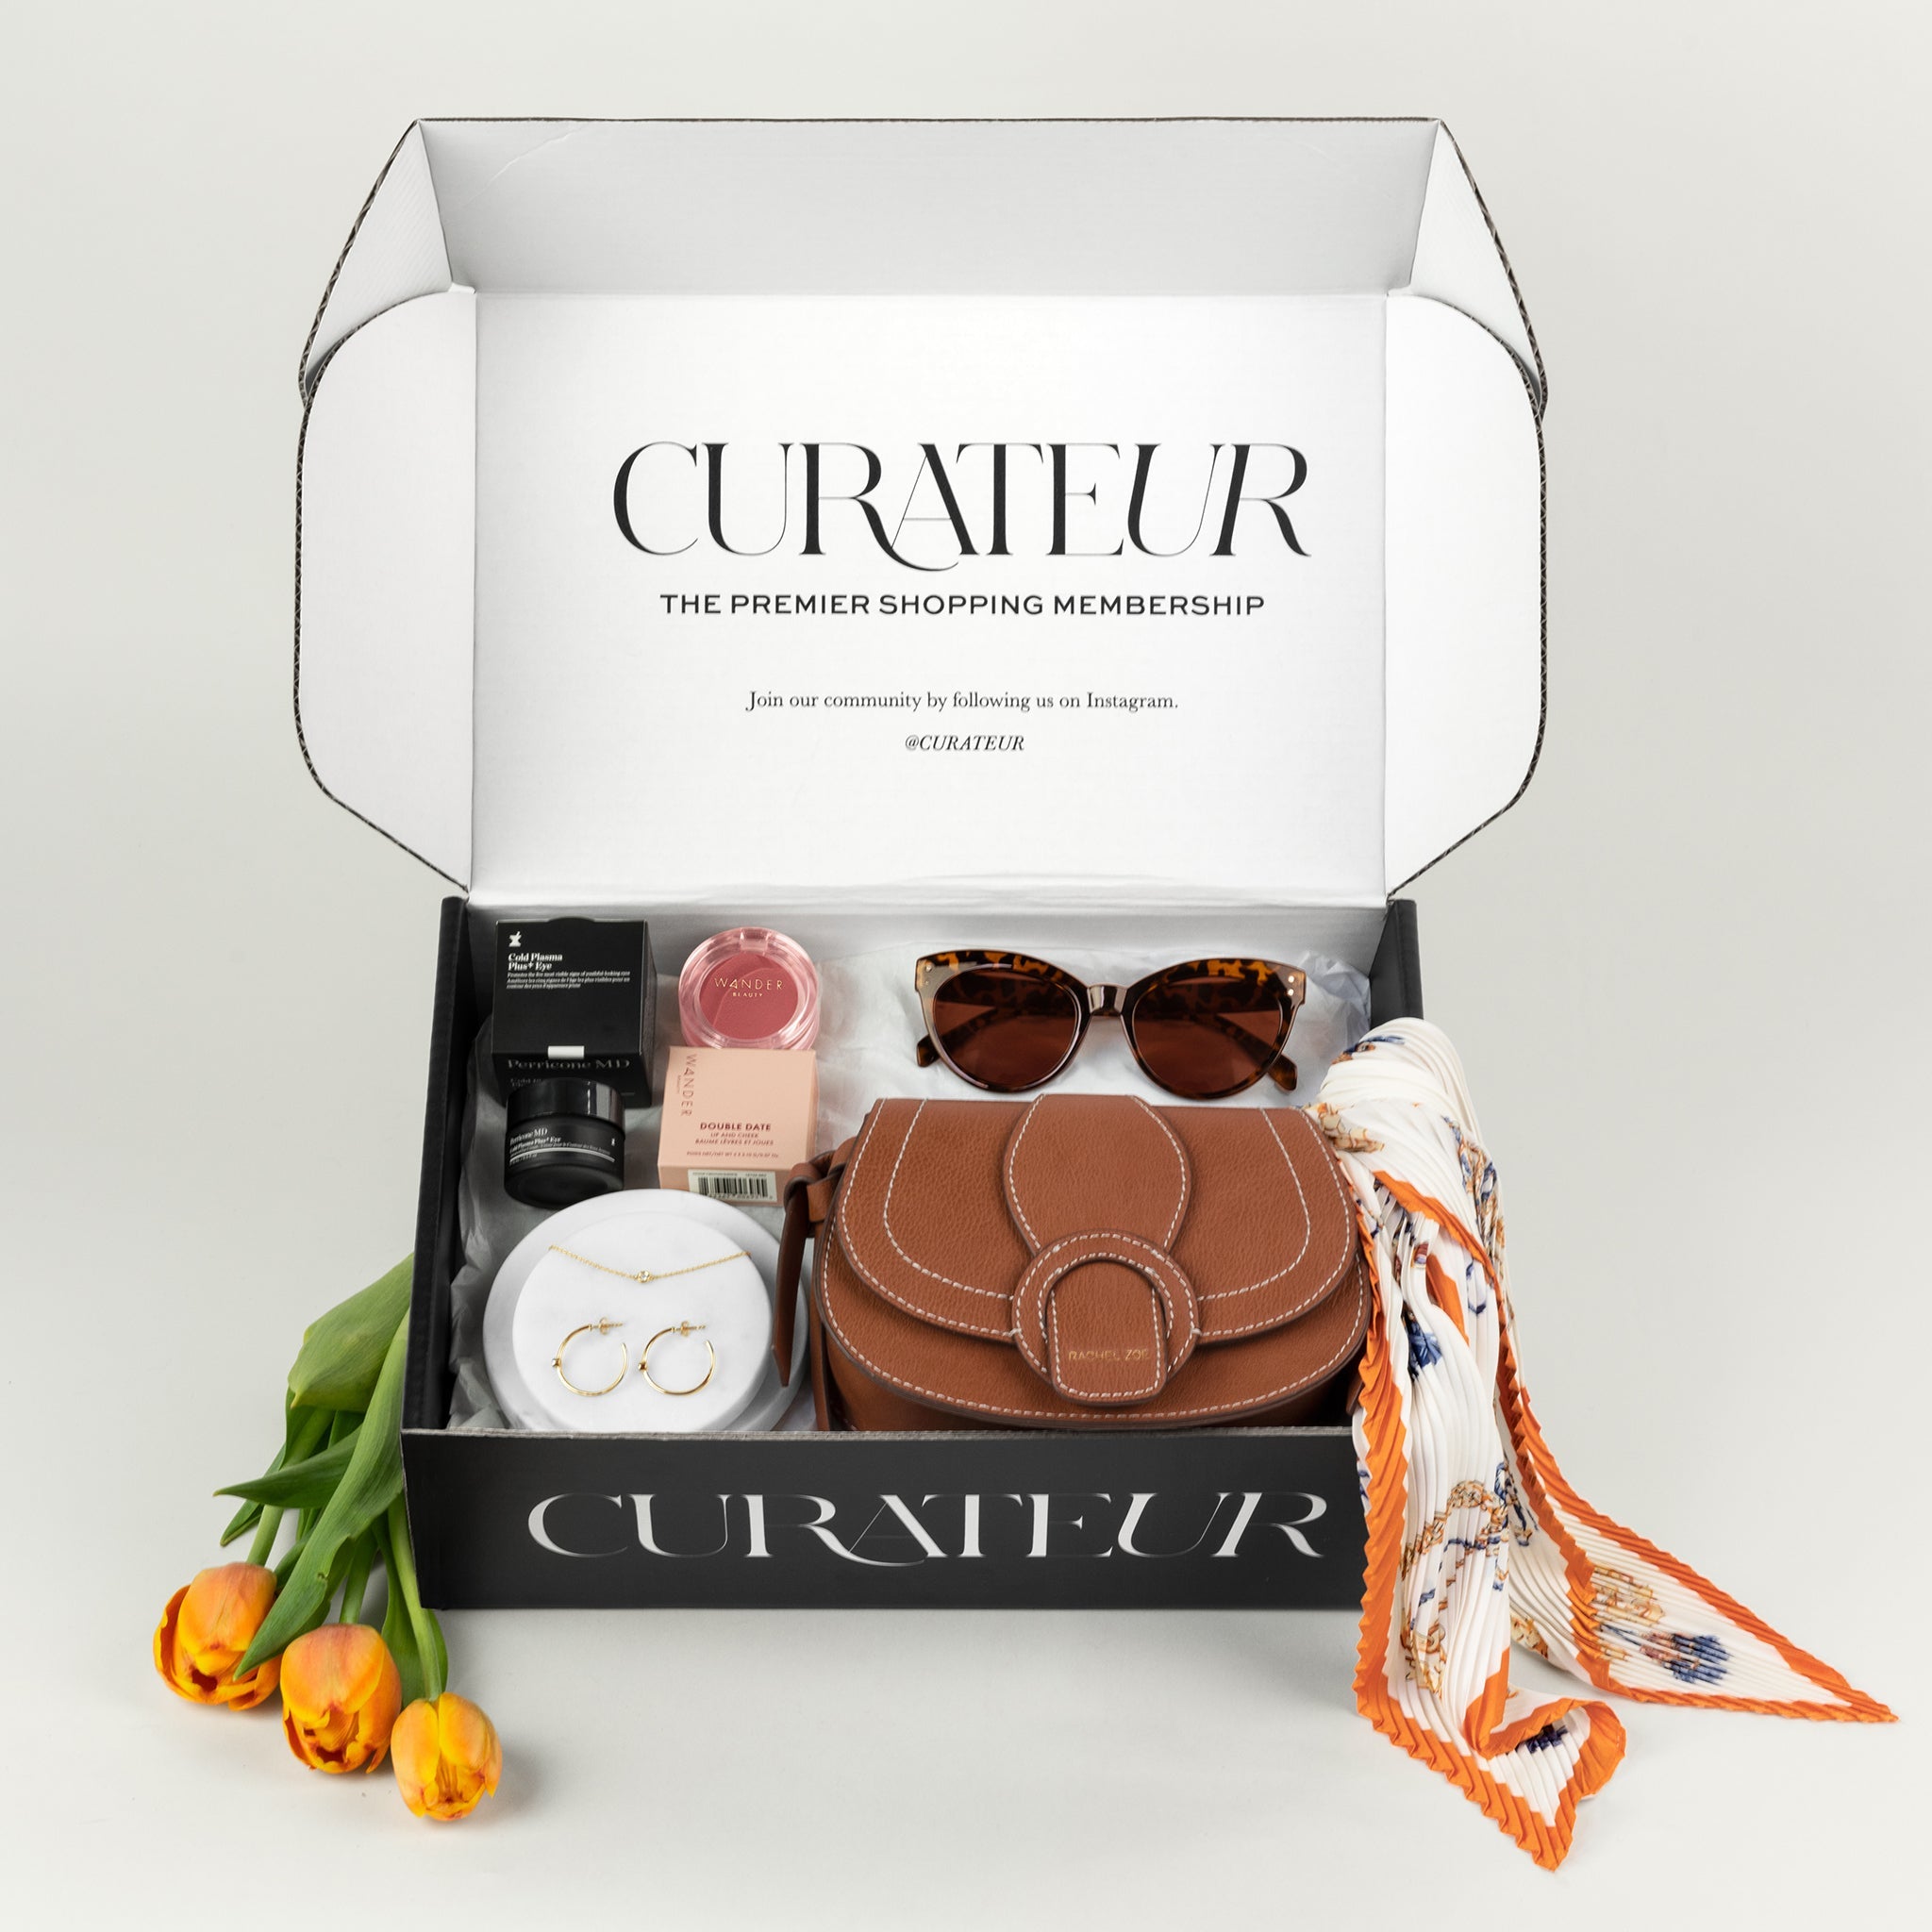 Rachel Zoe Spring Curateur Box Featured by Chic at Every Age